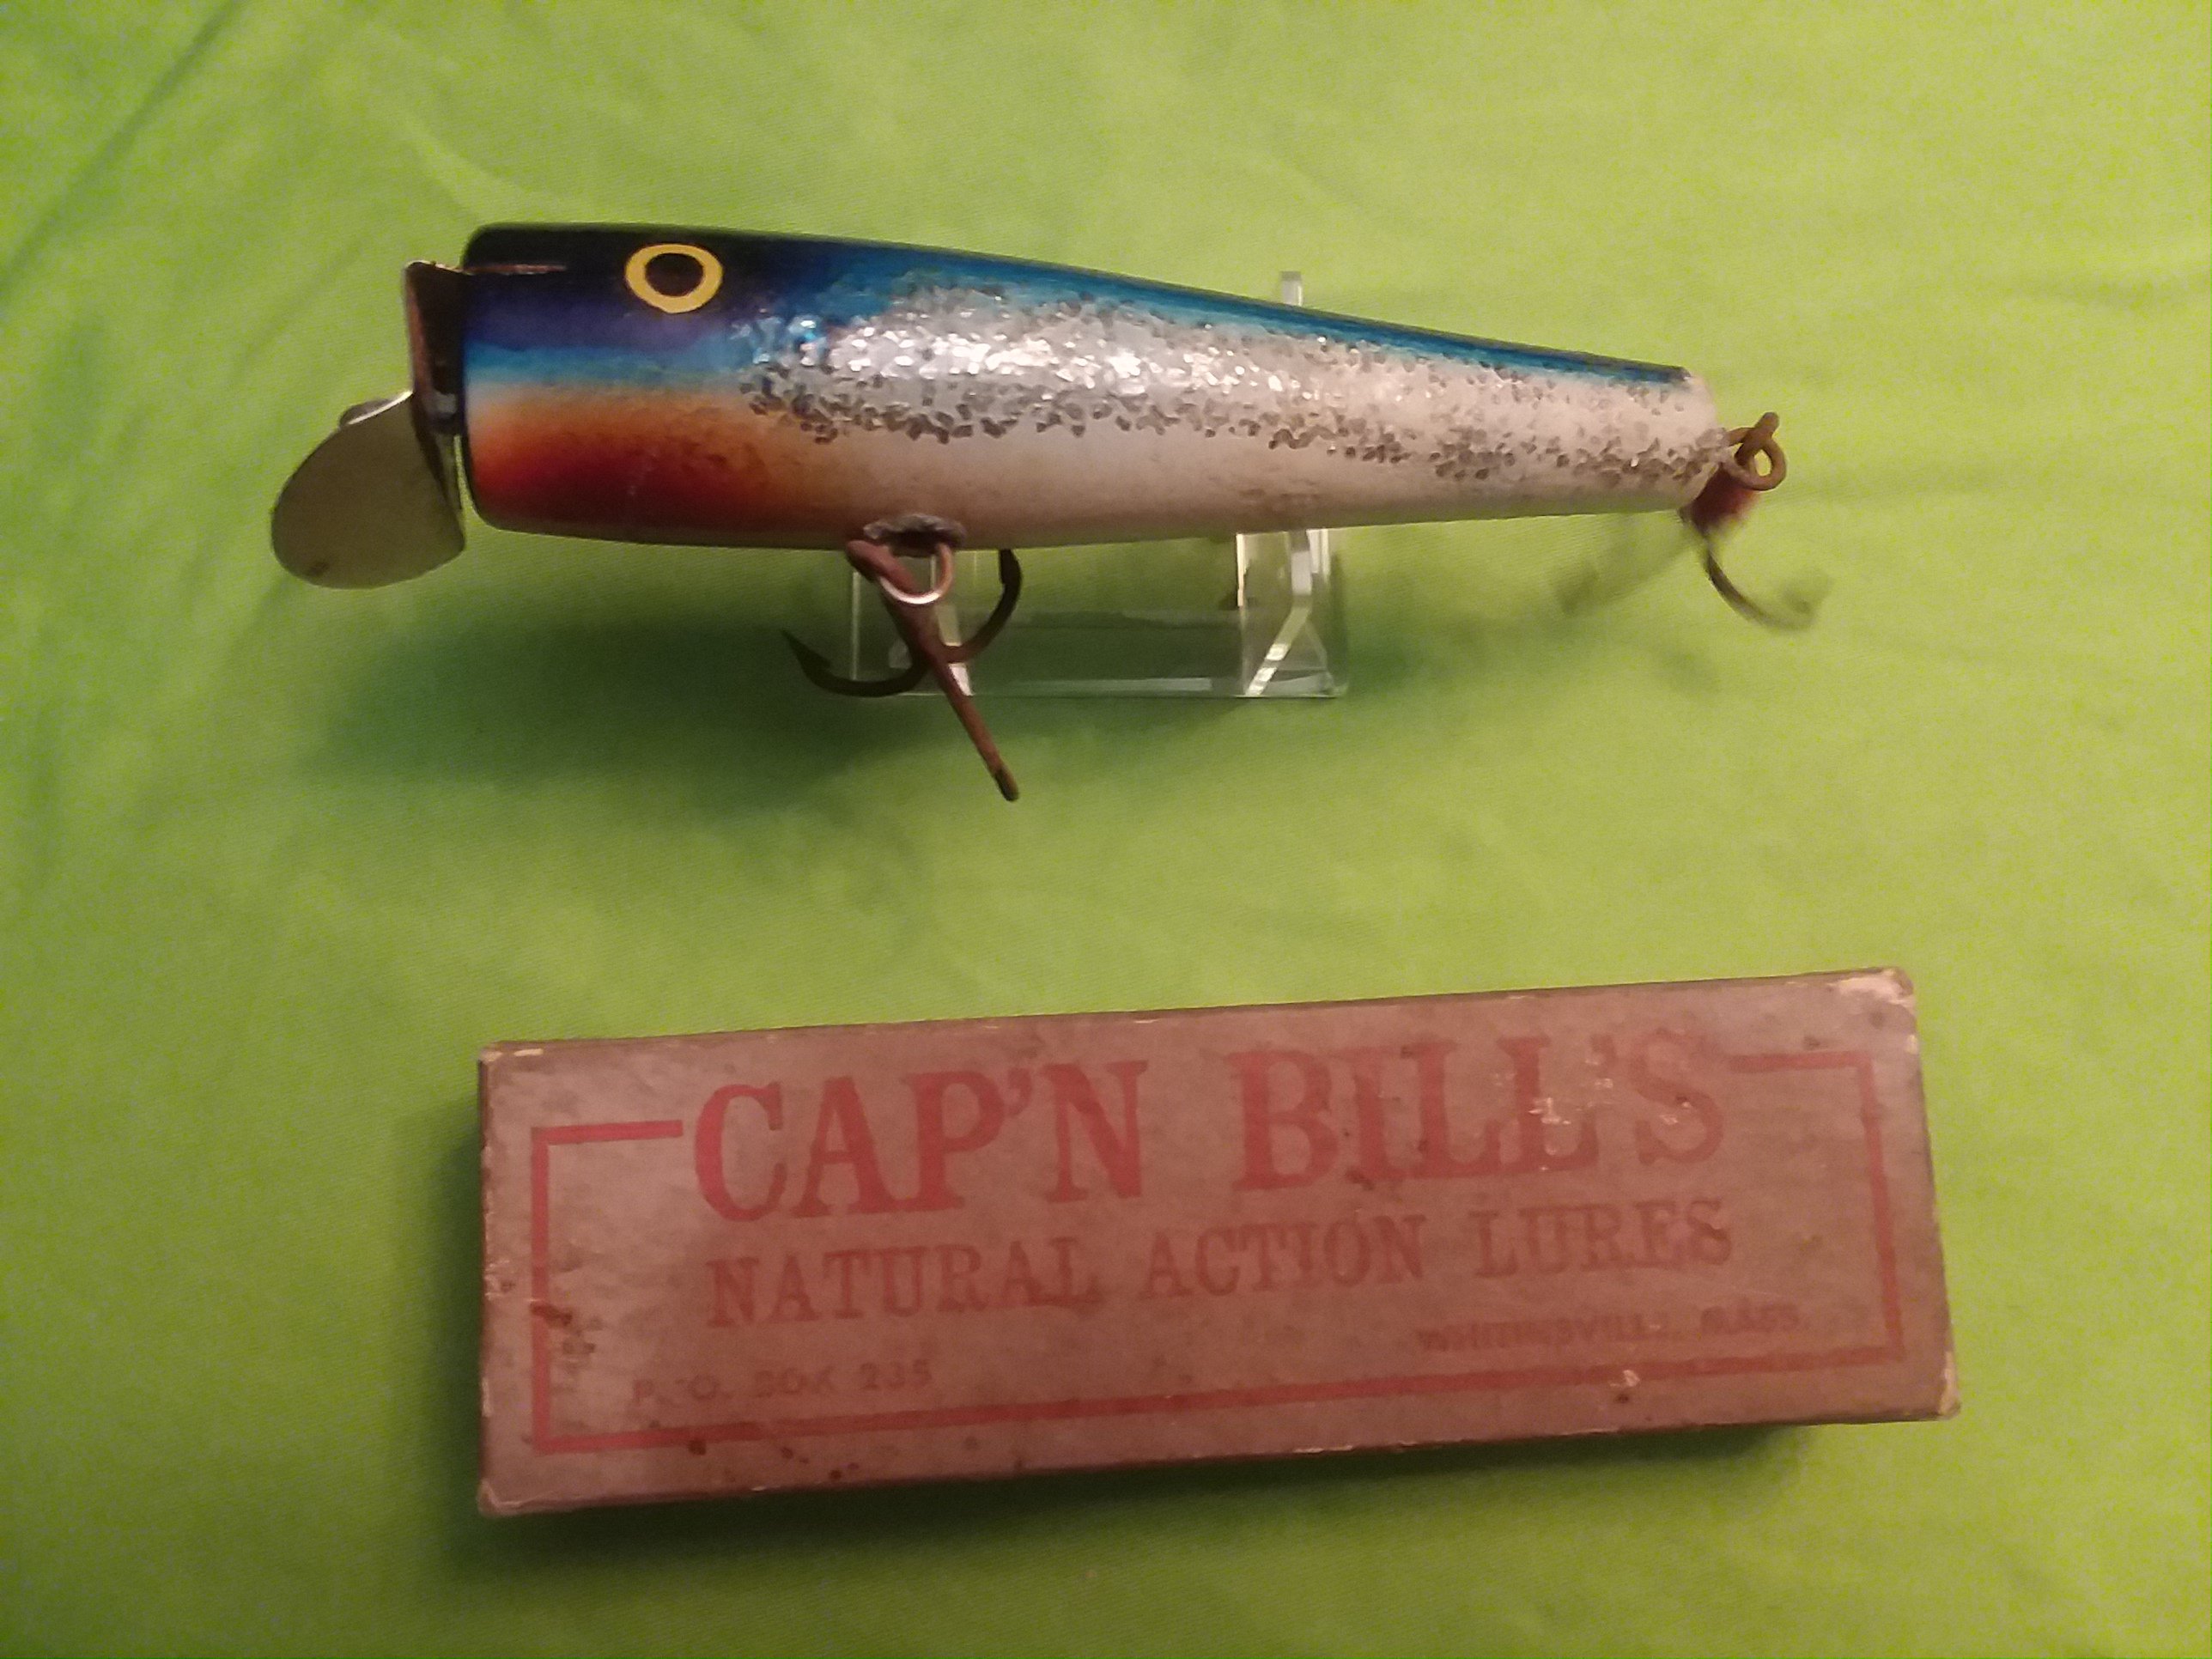 Cap'n Bill's Natural Action Lures, Whitinsville